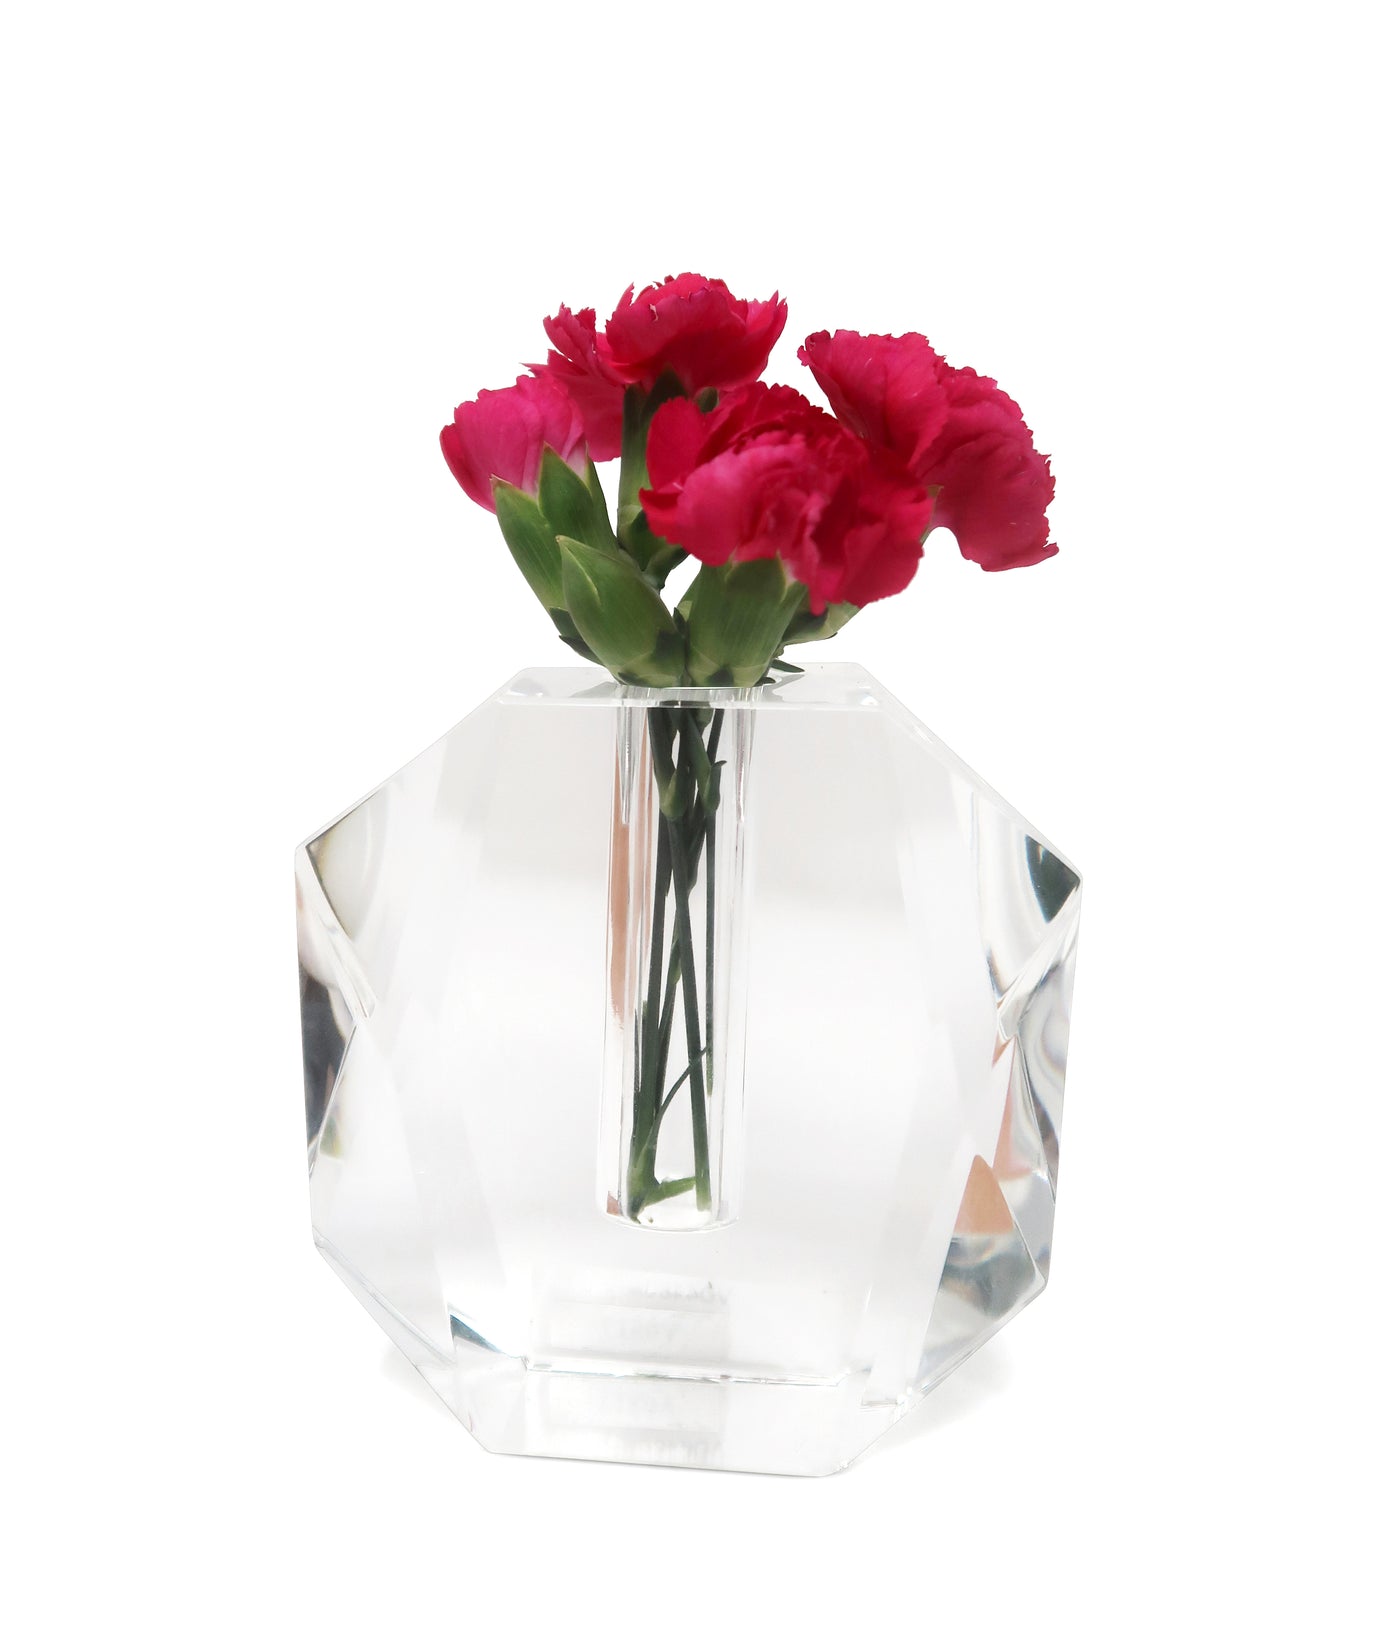 Crystal Bud Vase with a Dimensional Design, 5"H